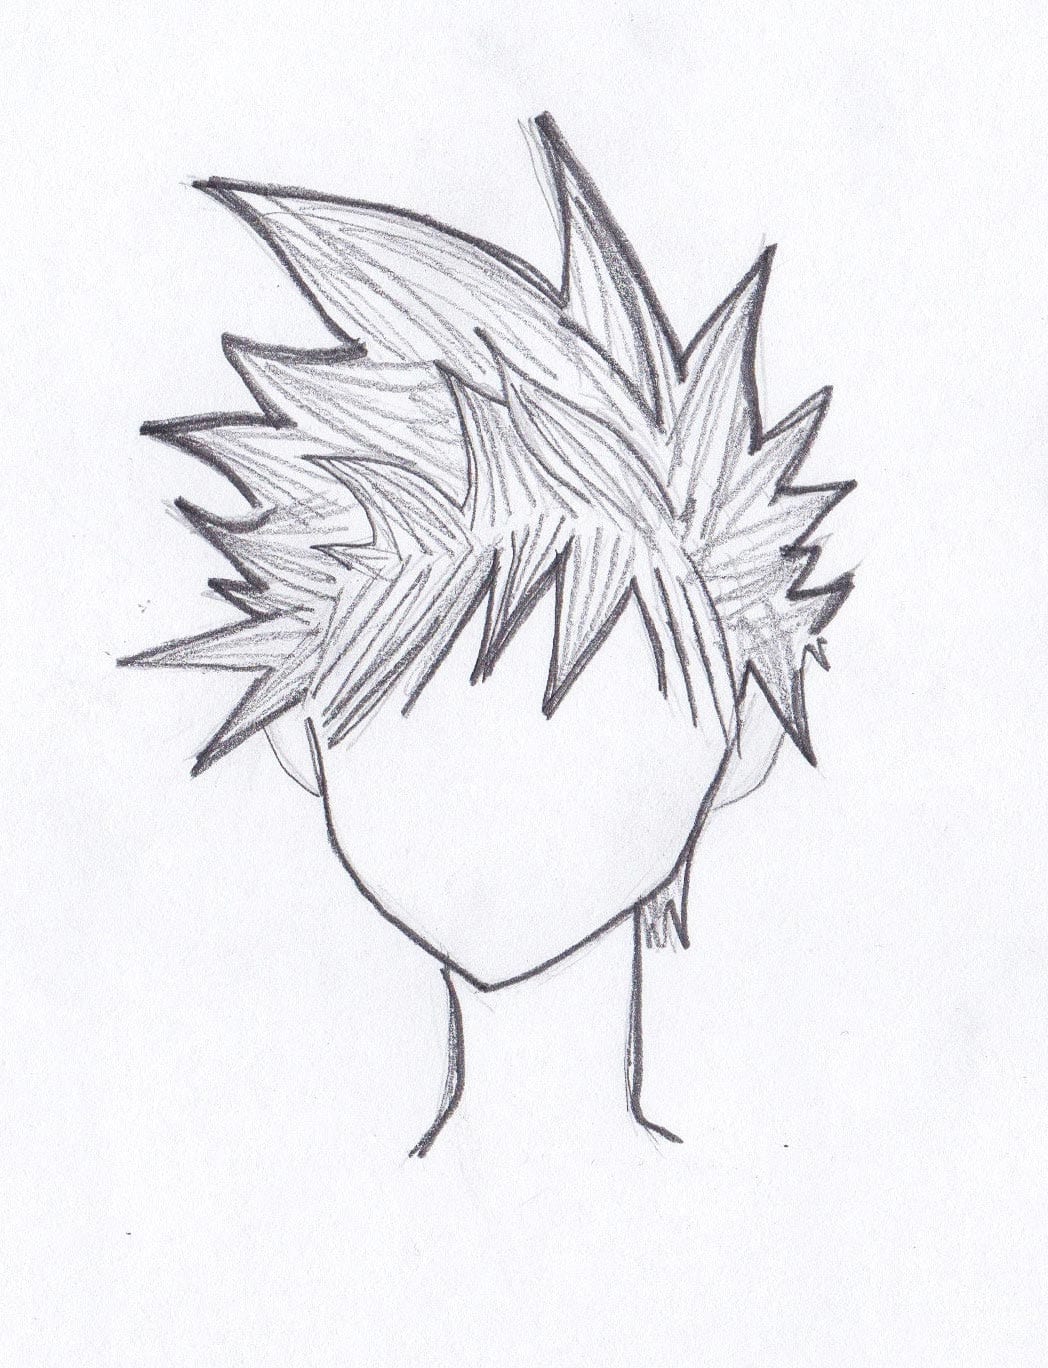 The Complete Guide on How to Draw Anime Hair | Corel Painter